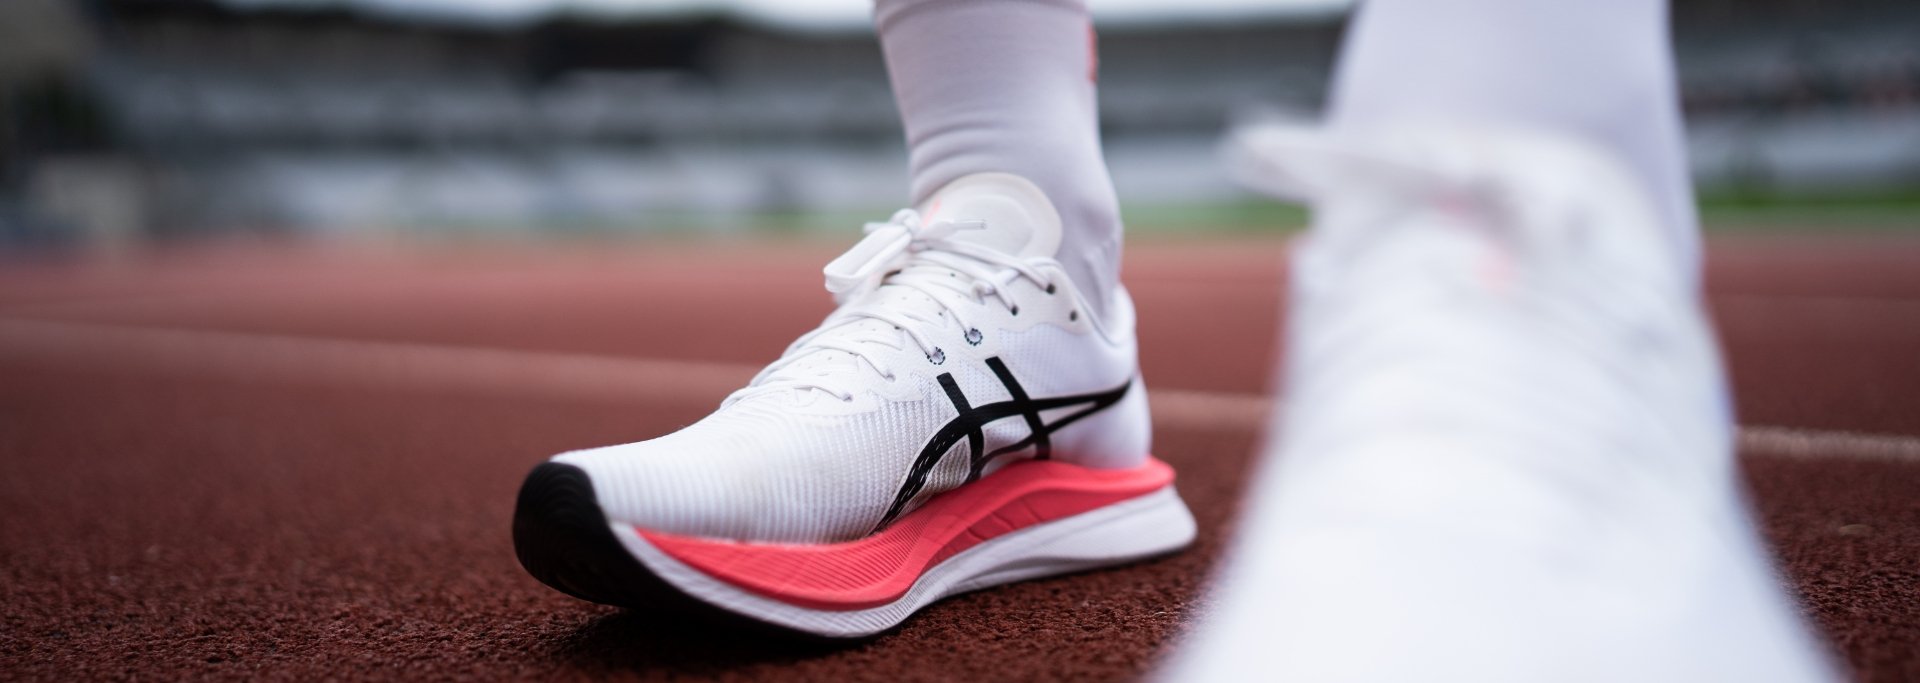 Test: Asics Magic Speed 3 - The magic is in the midsole